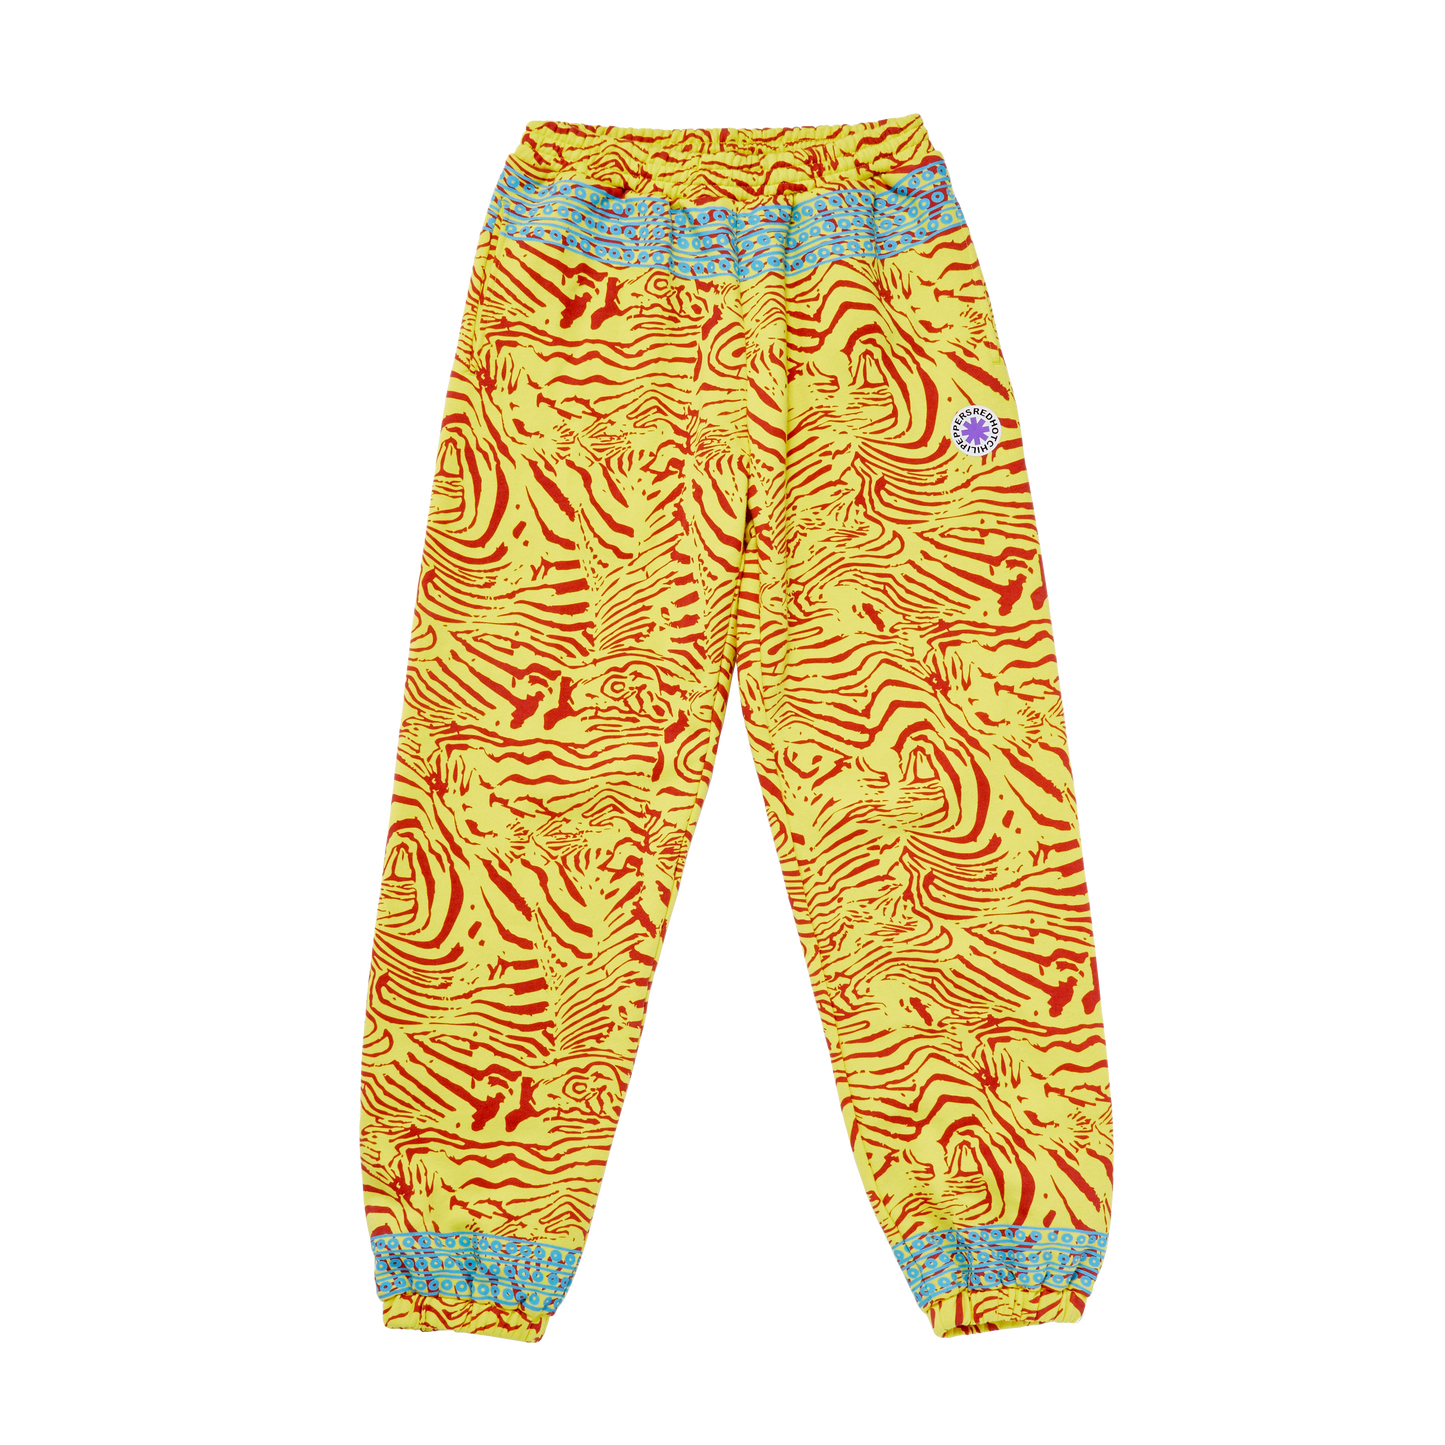 Michael Rios Special Artist Sweatpant – Red Hot Chili Peppers